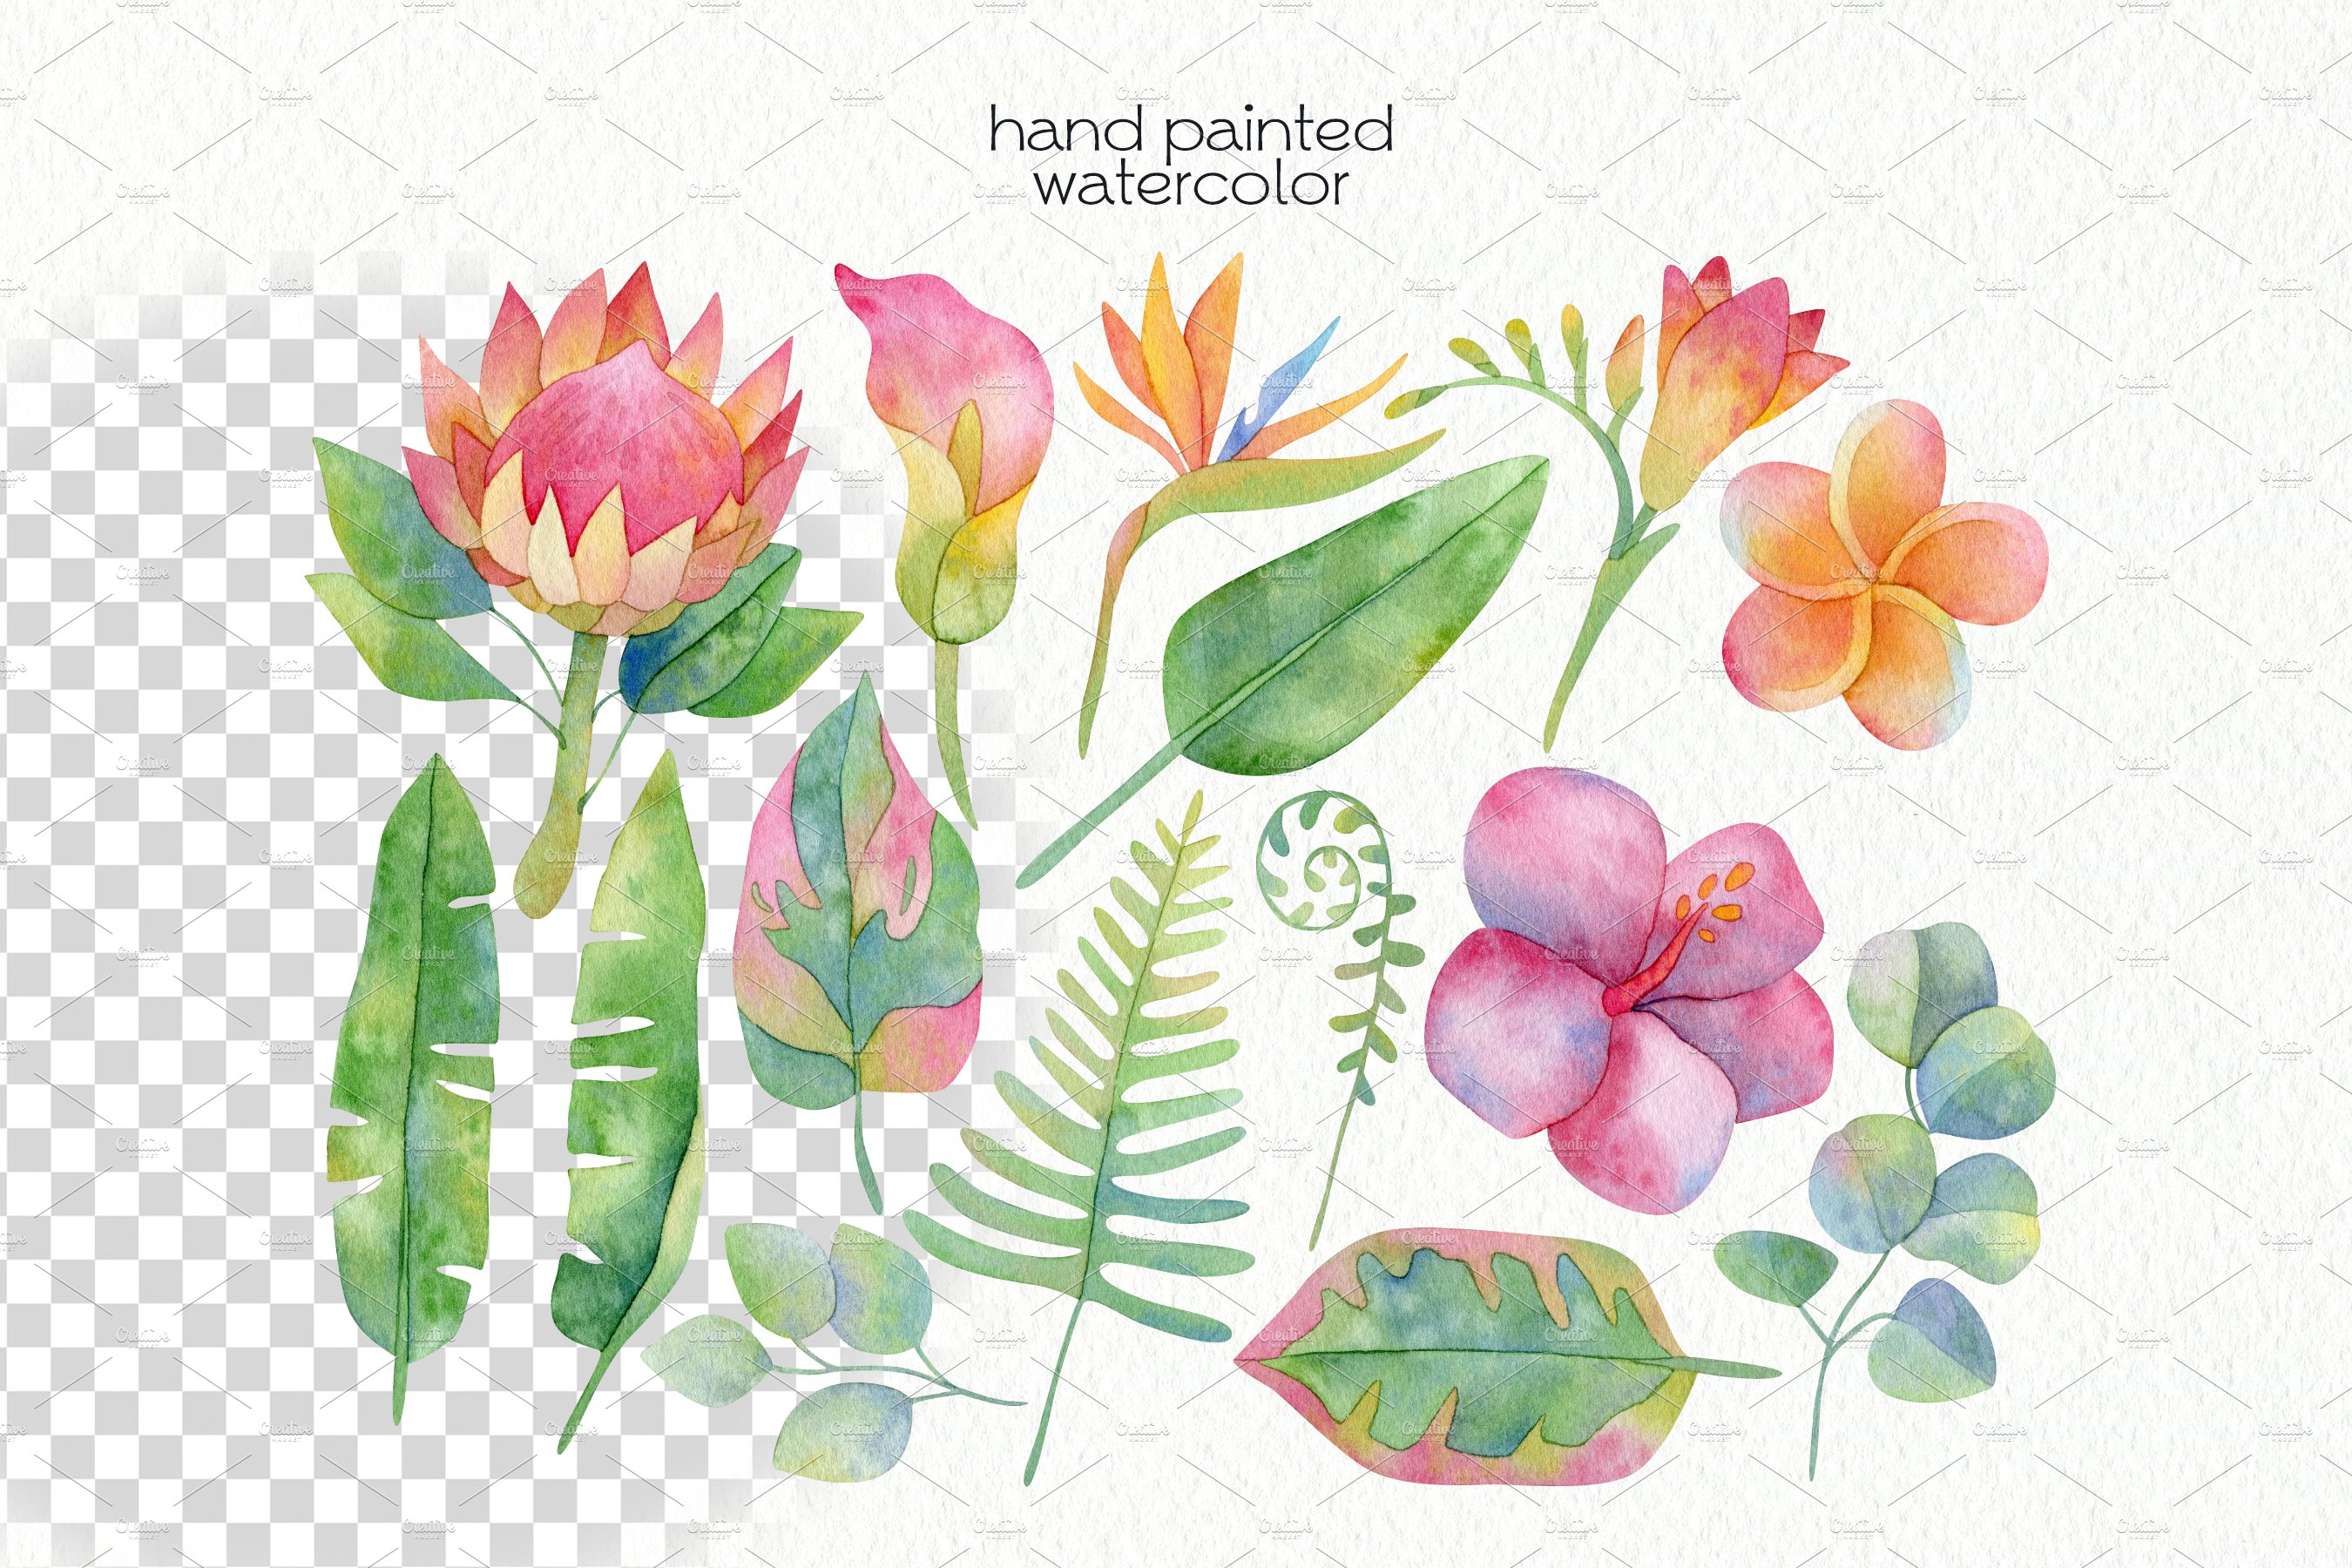 Hand painted watercolor elements for interesting tropical composition.